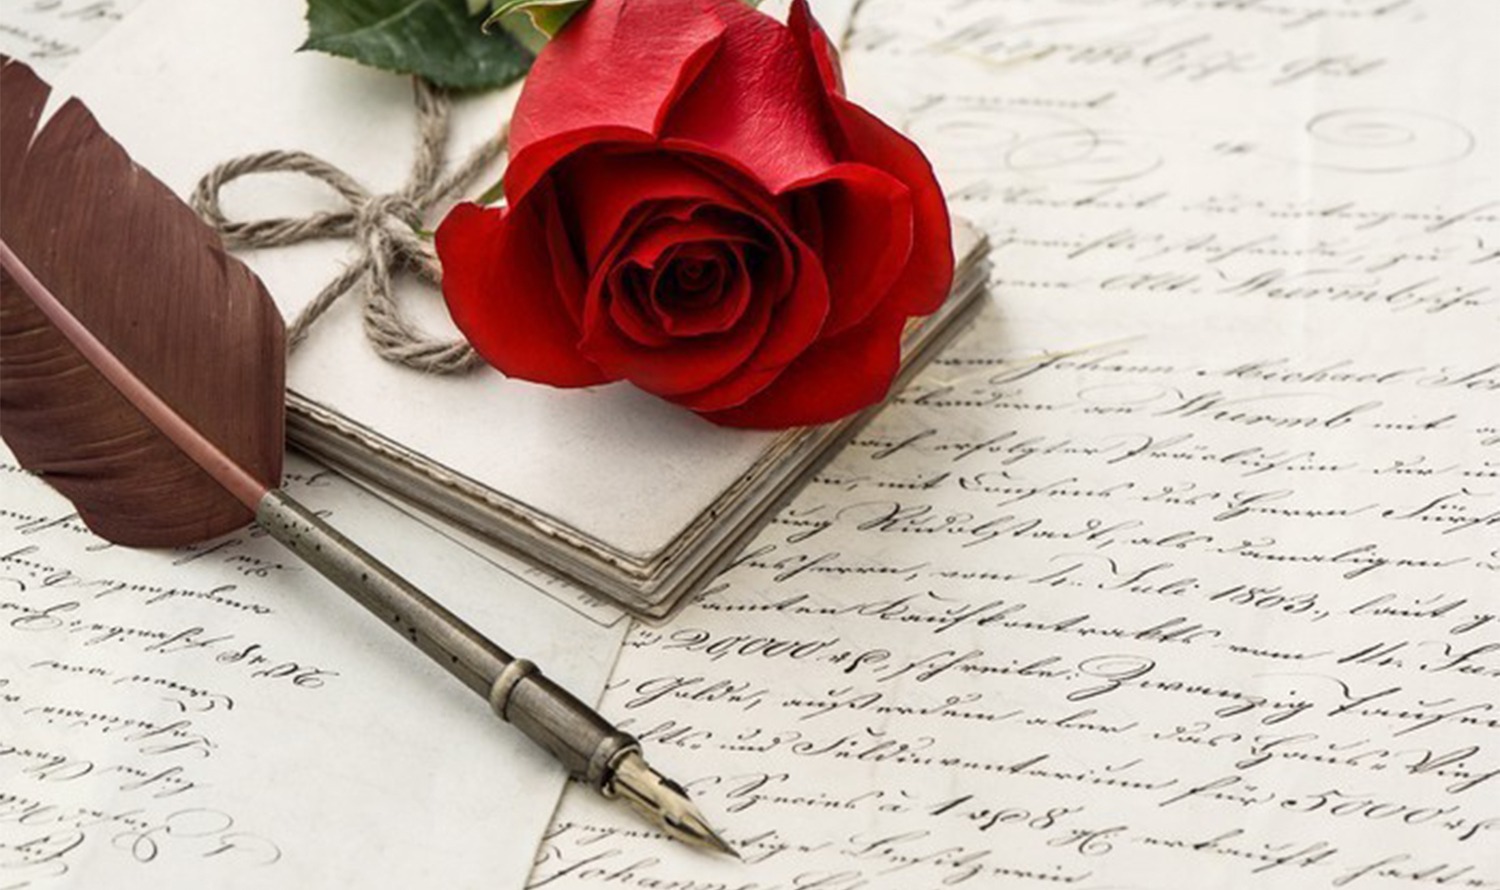 The picture features a red rose, an old fountain pen and several handwritten letters, creating a nostalgic atmosphere.